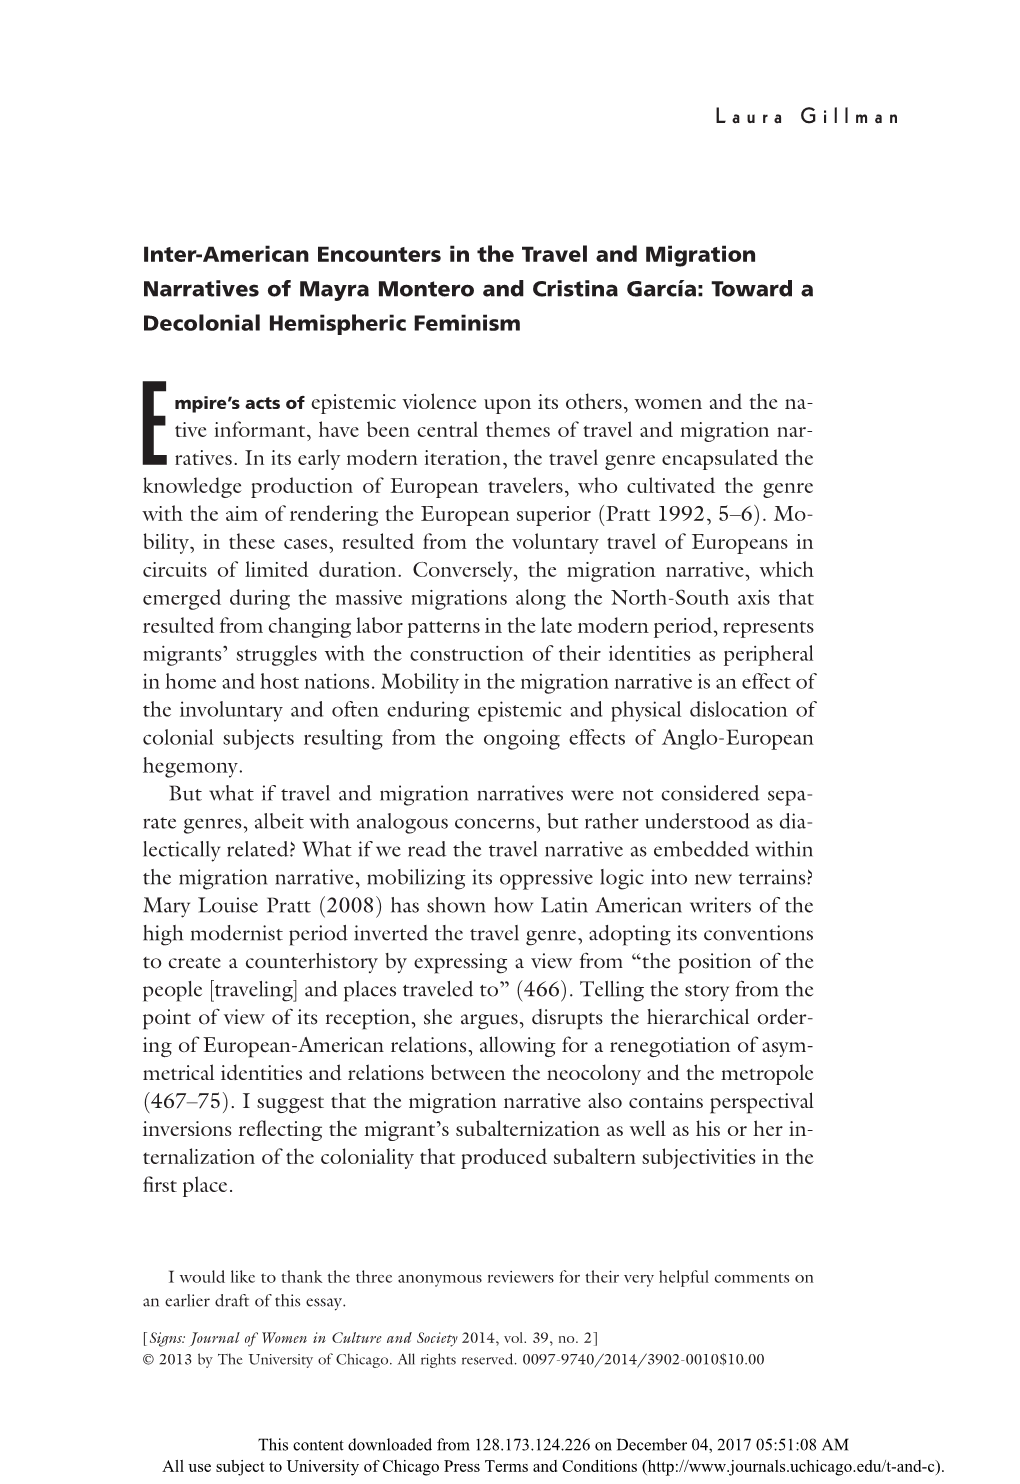 Inter-American Encounters in the Travel and Migration Narratives of Mayra Montero and Cristina Garcı´A: Toward a Decolonial Hemispheric Feminism